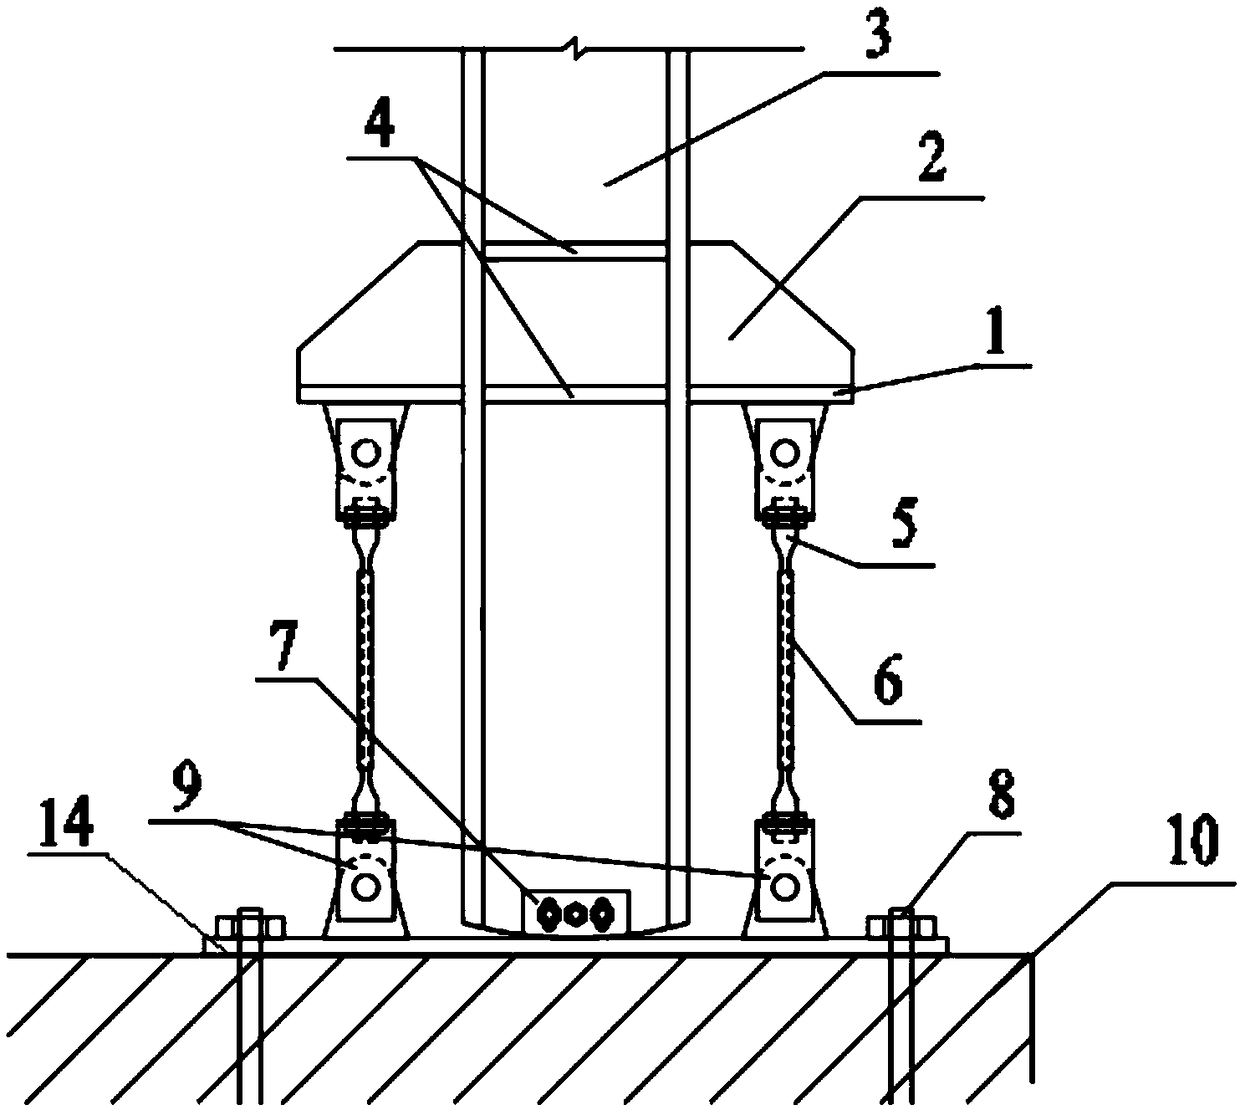 Self-resetting column foot node based on shape memory alloy bar and steel structure building